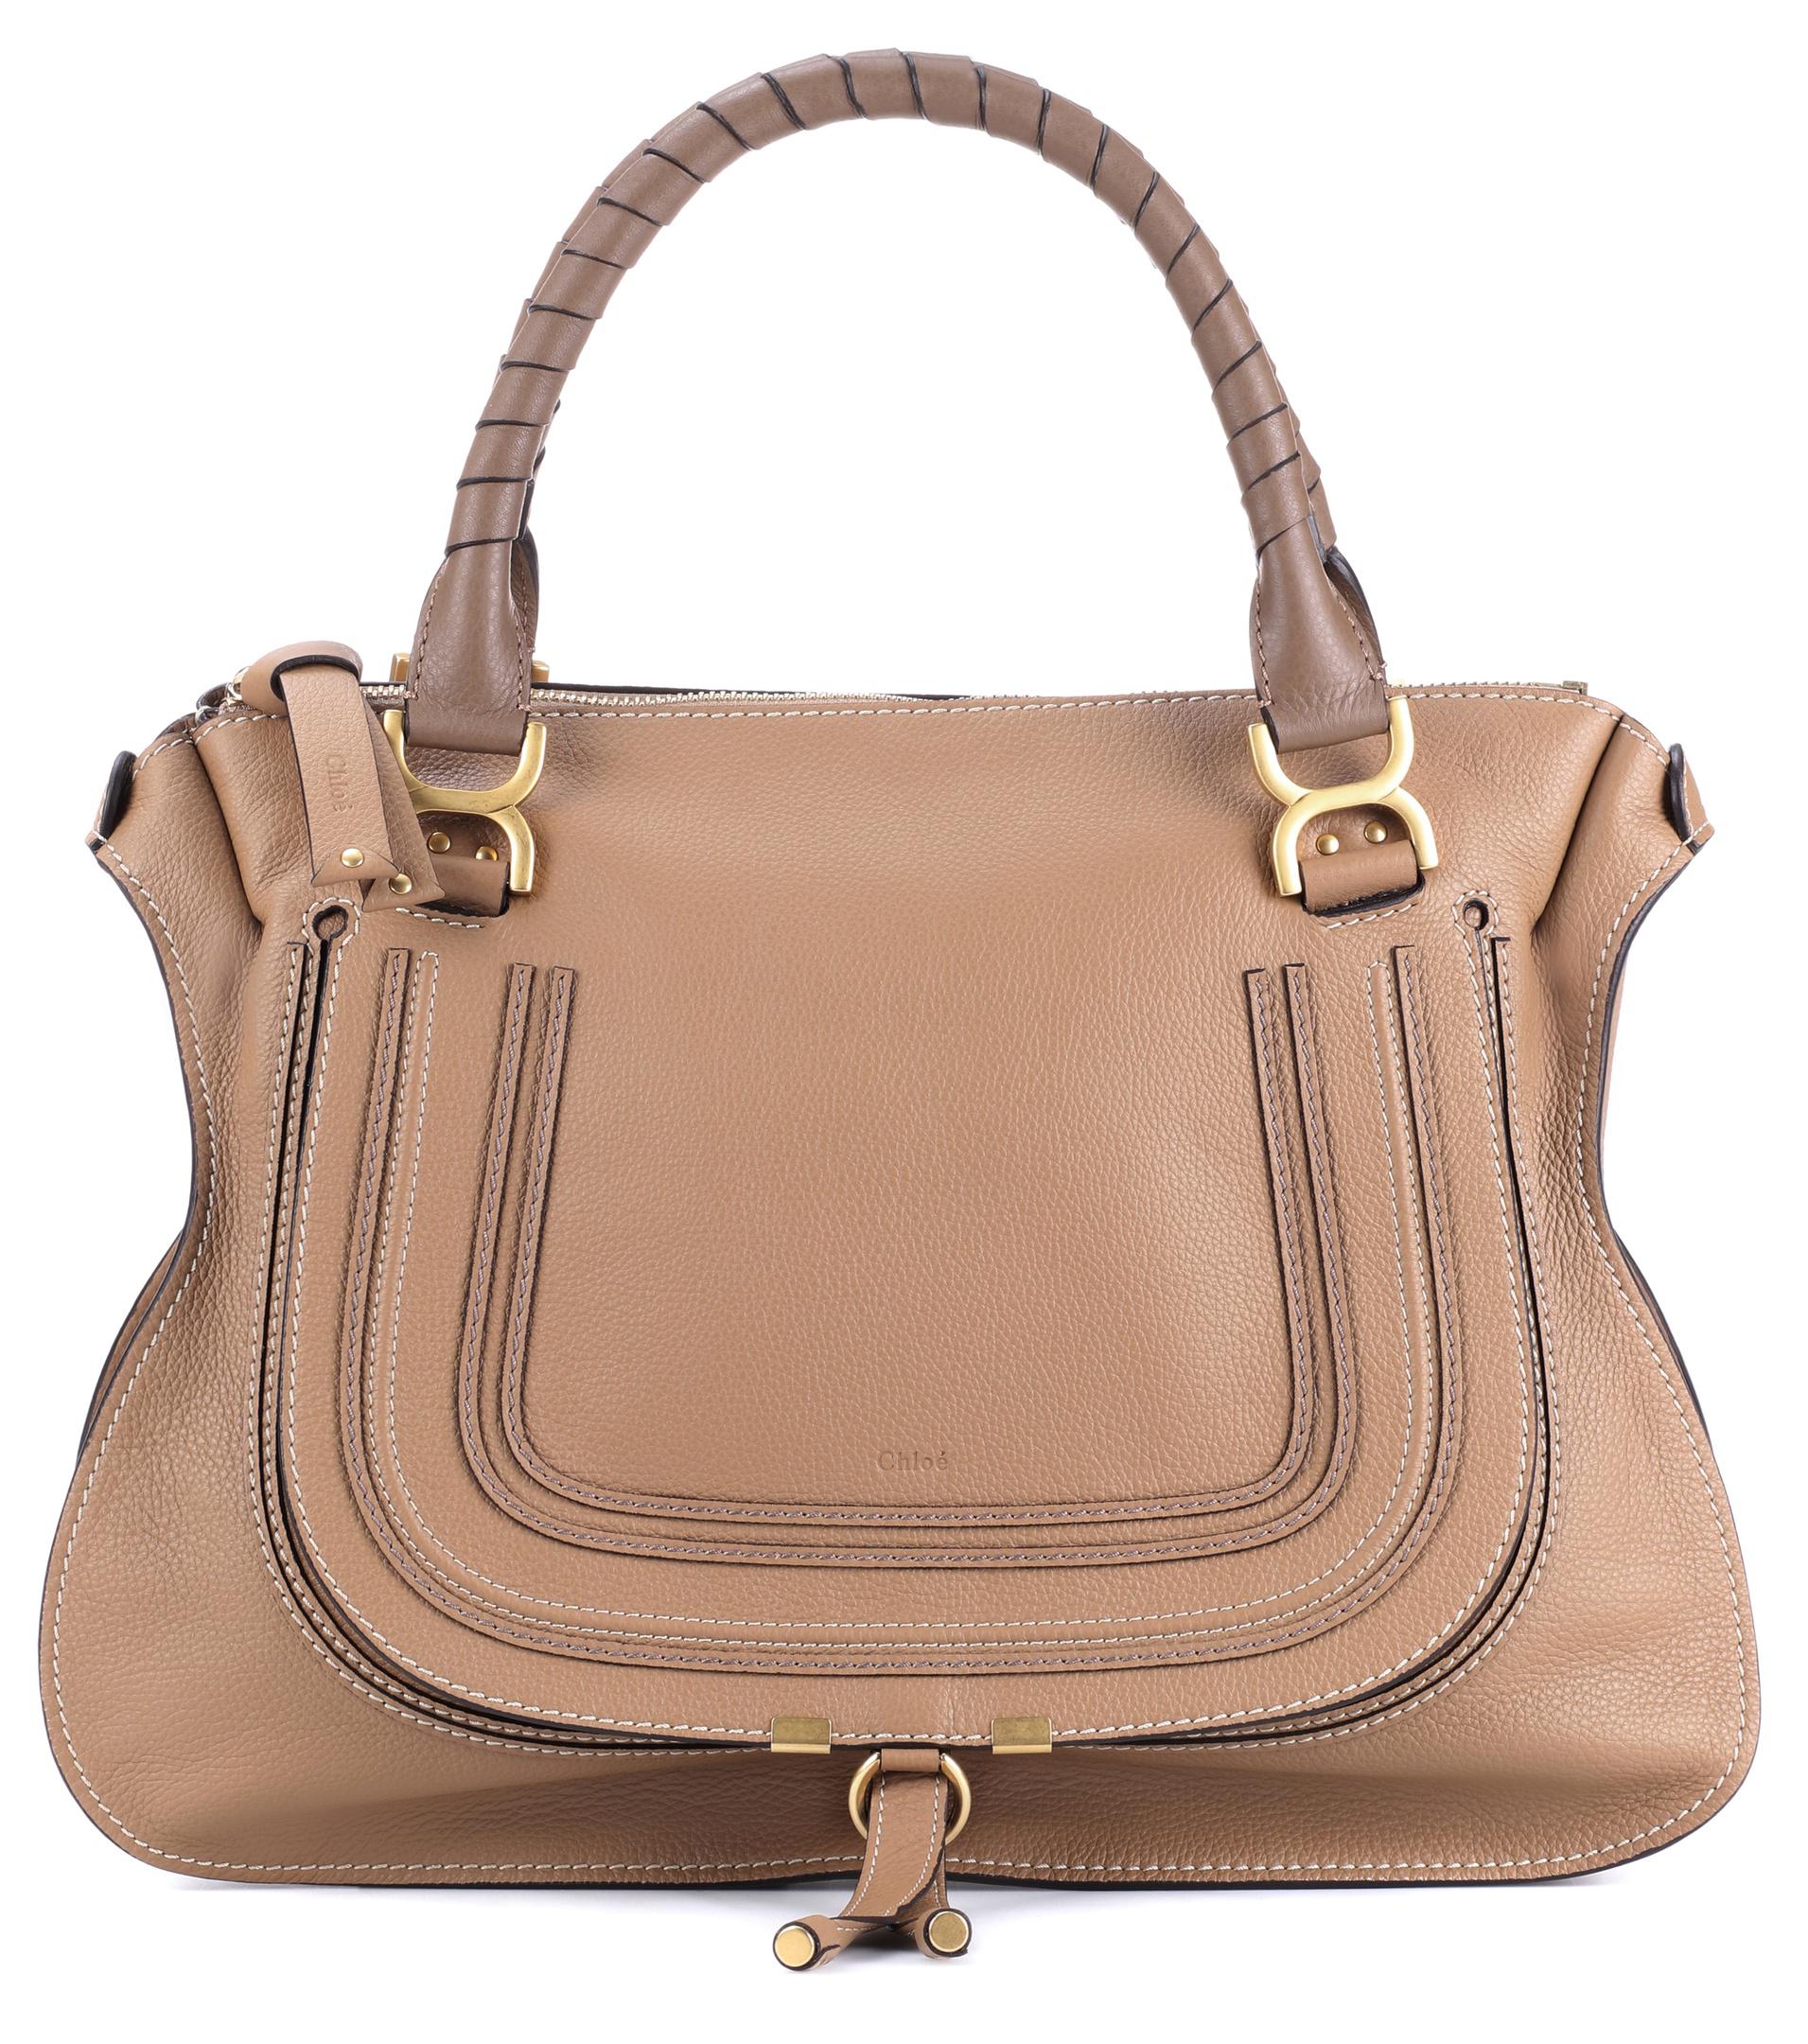 Chloé Marcie Large Leather Tote in Brown - Lyst